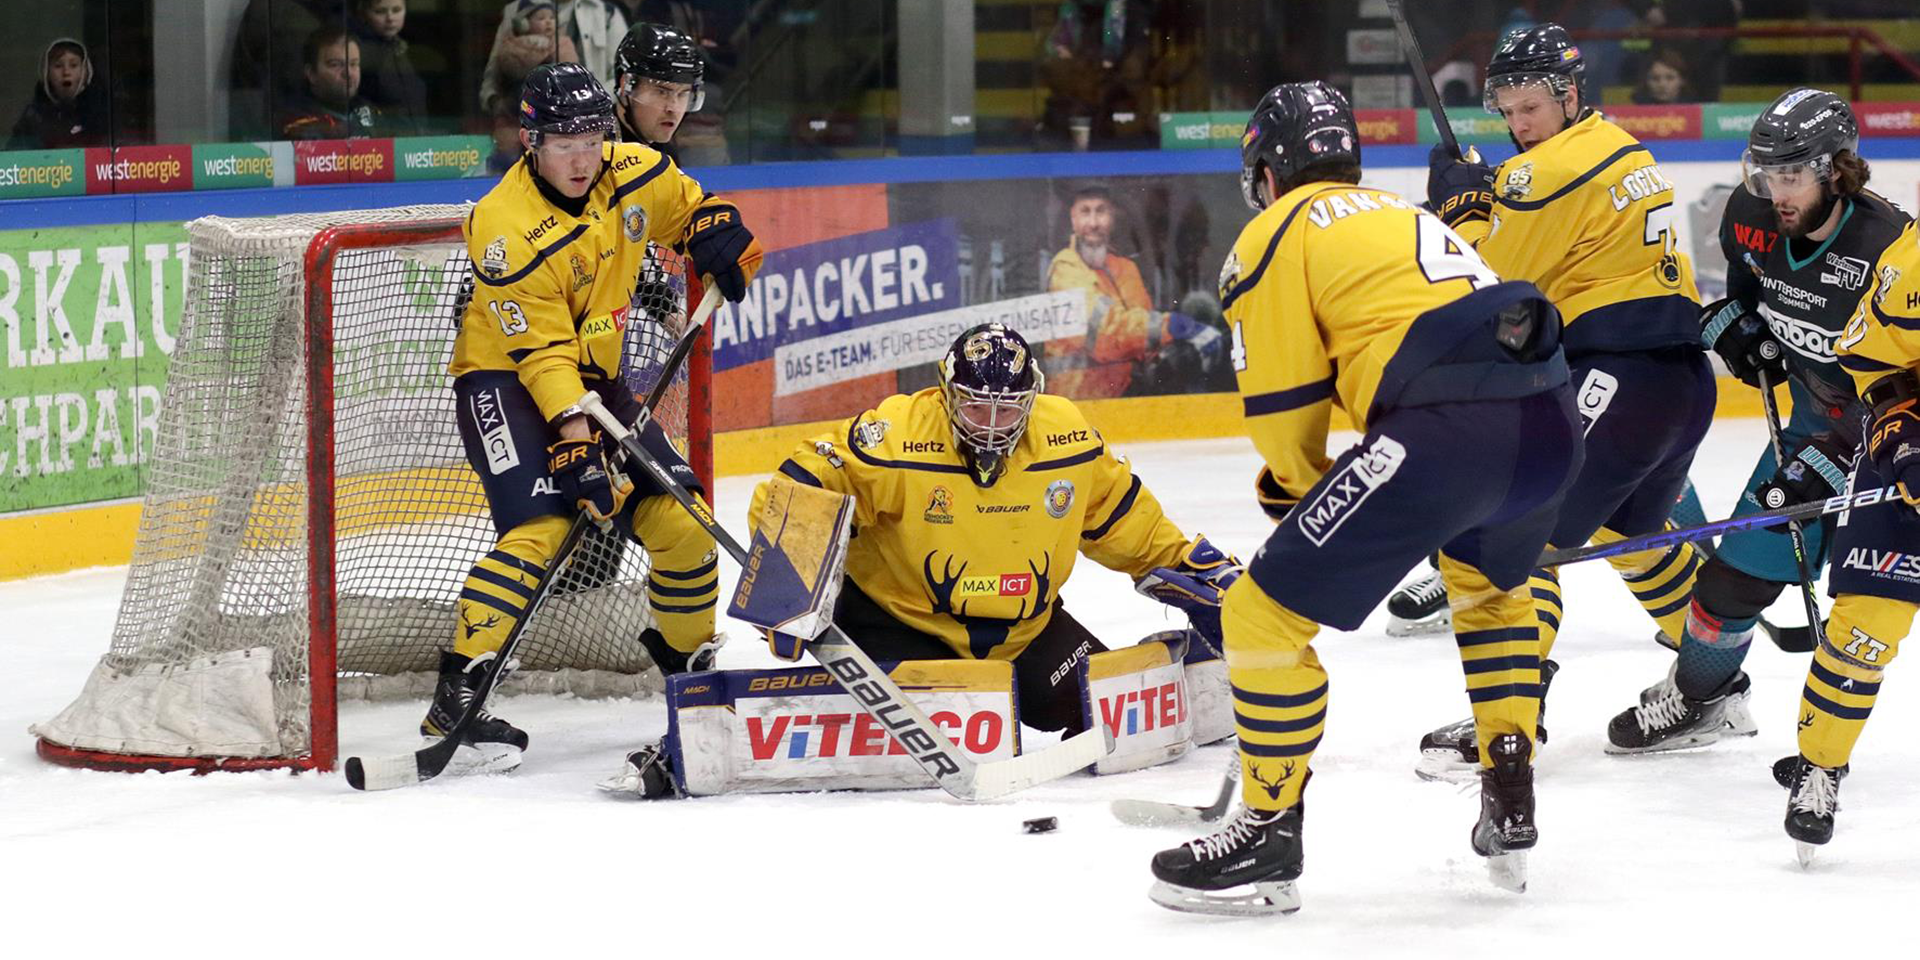 TRAPPERS WINT OOK VAN MOSKITOS IN ESSENSE OVERTIME